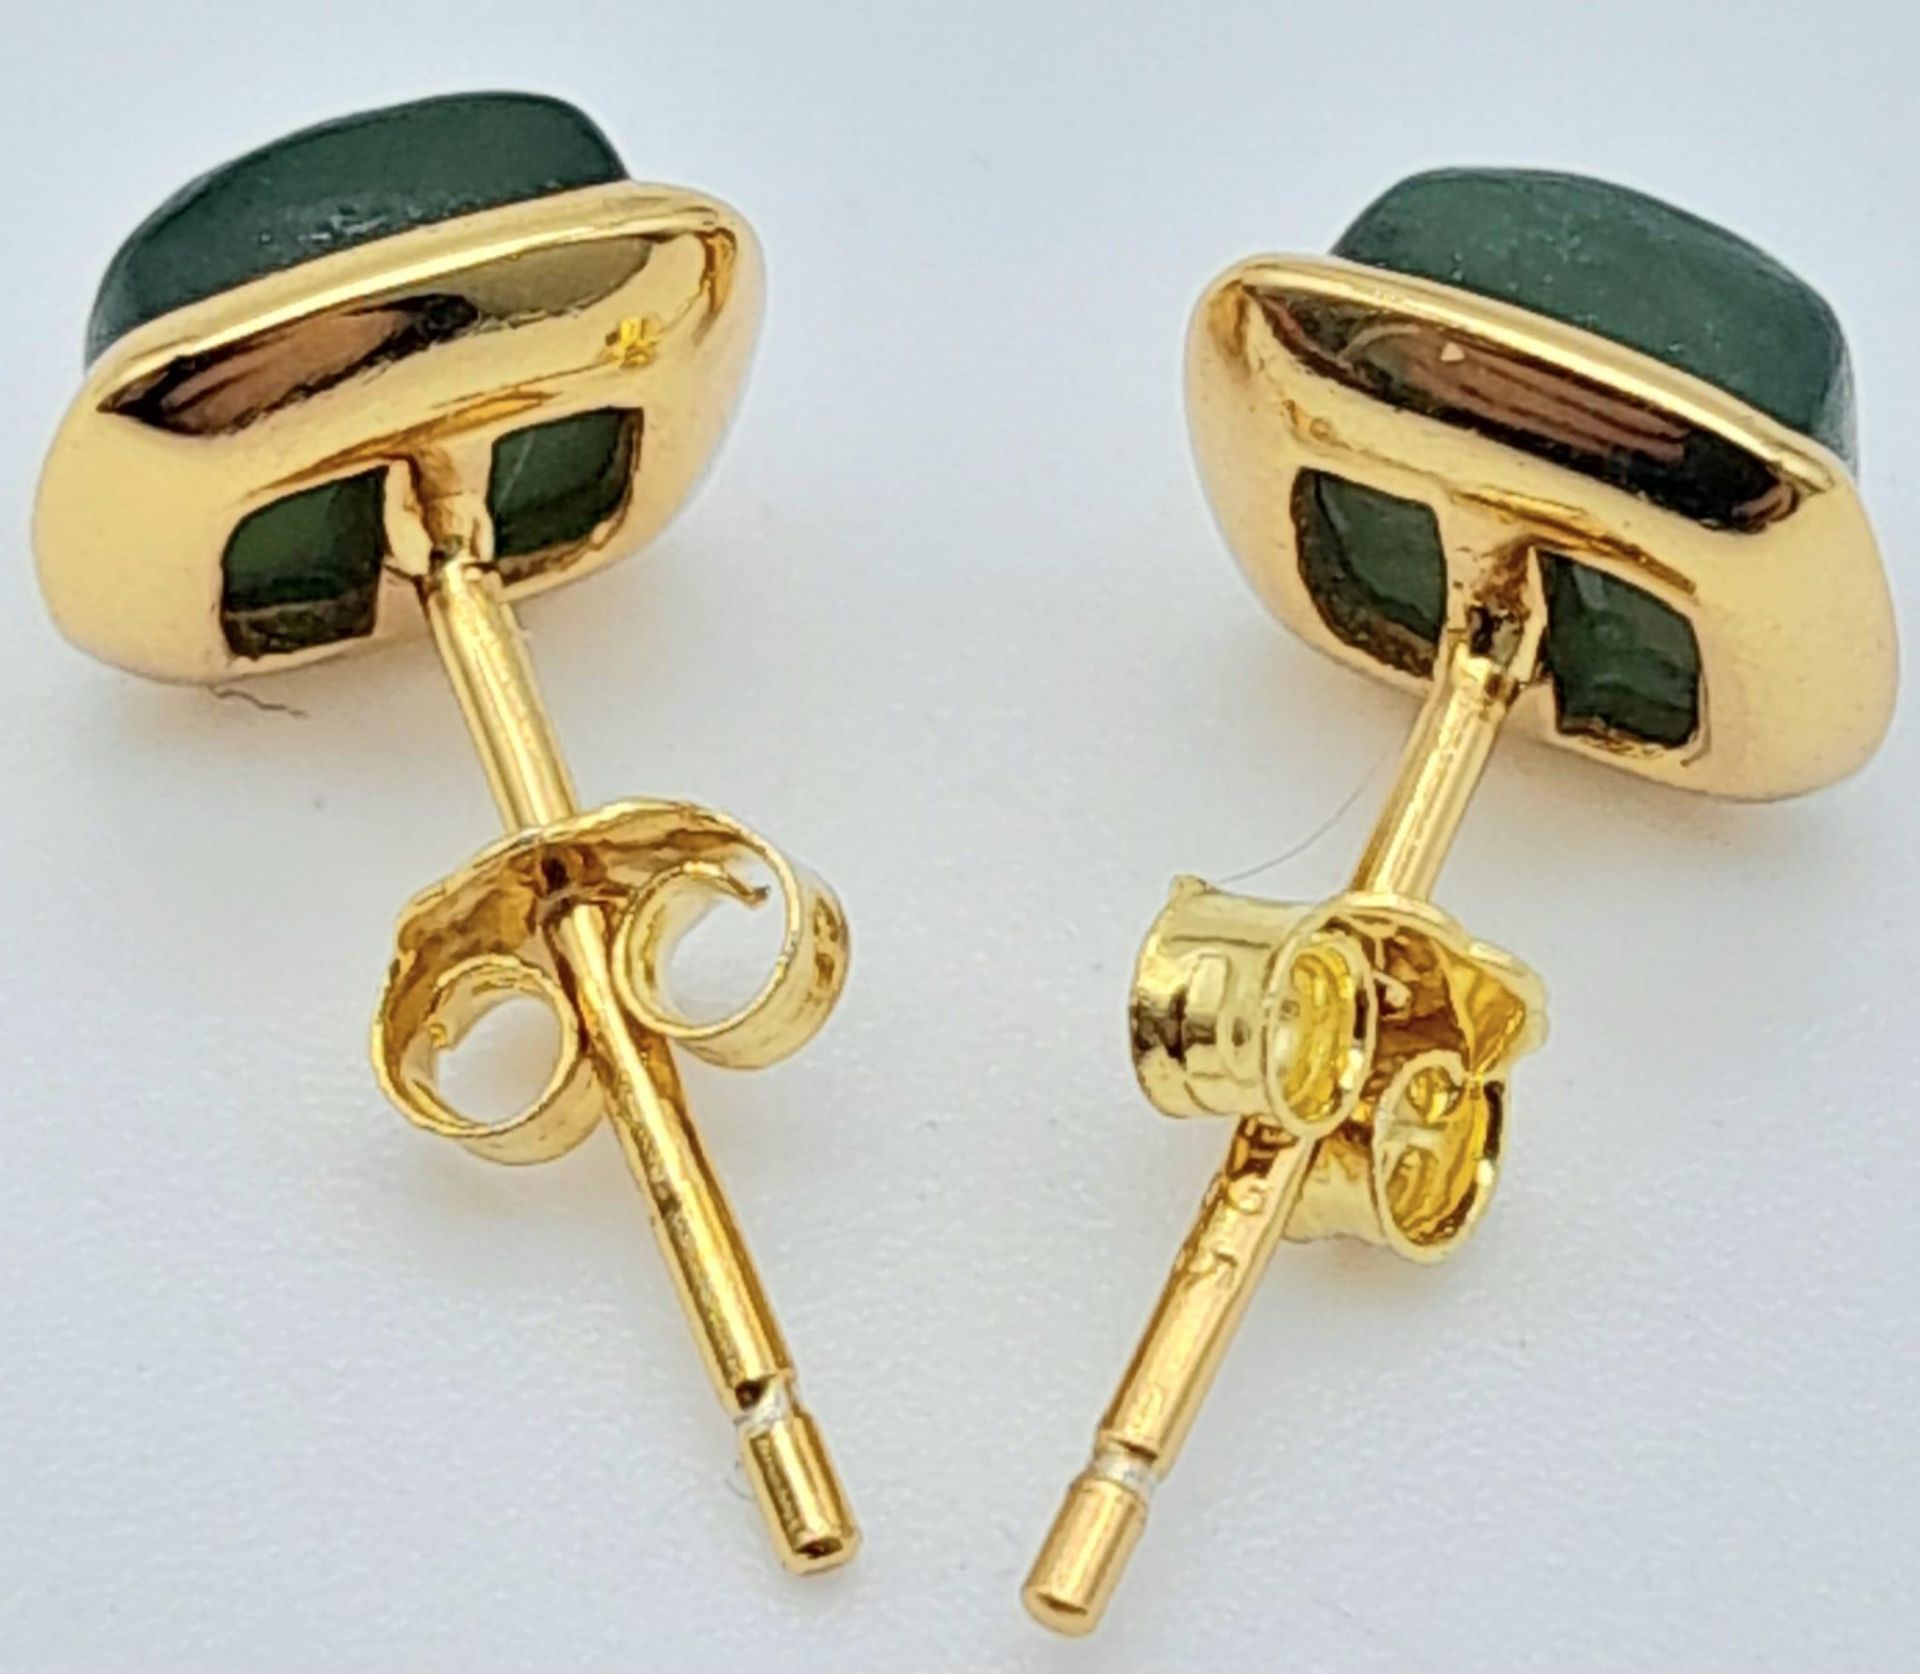 Delightful pair of Yellow Gold Gilded, Sterling Silver Jade Stud Earrings. Measures 0.5cm wide. - Image 2 of 4